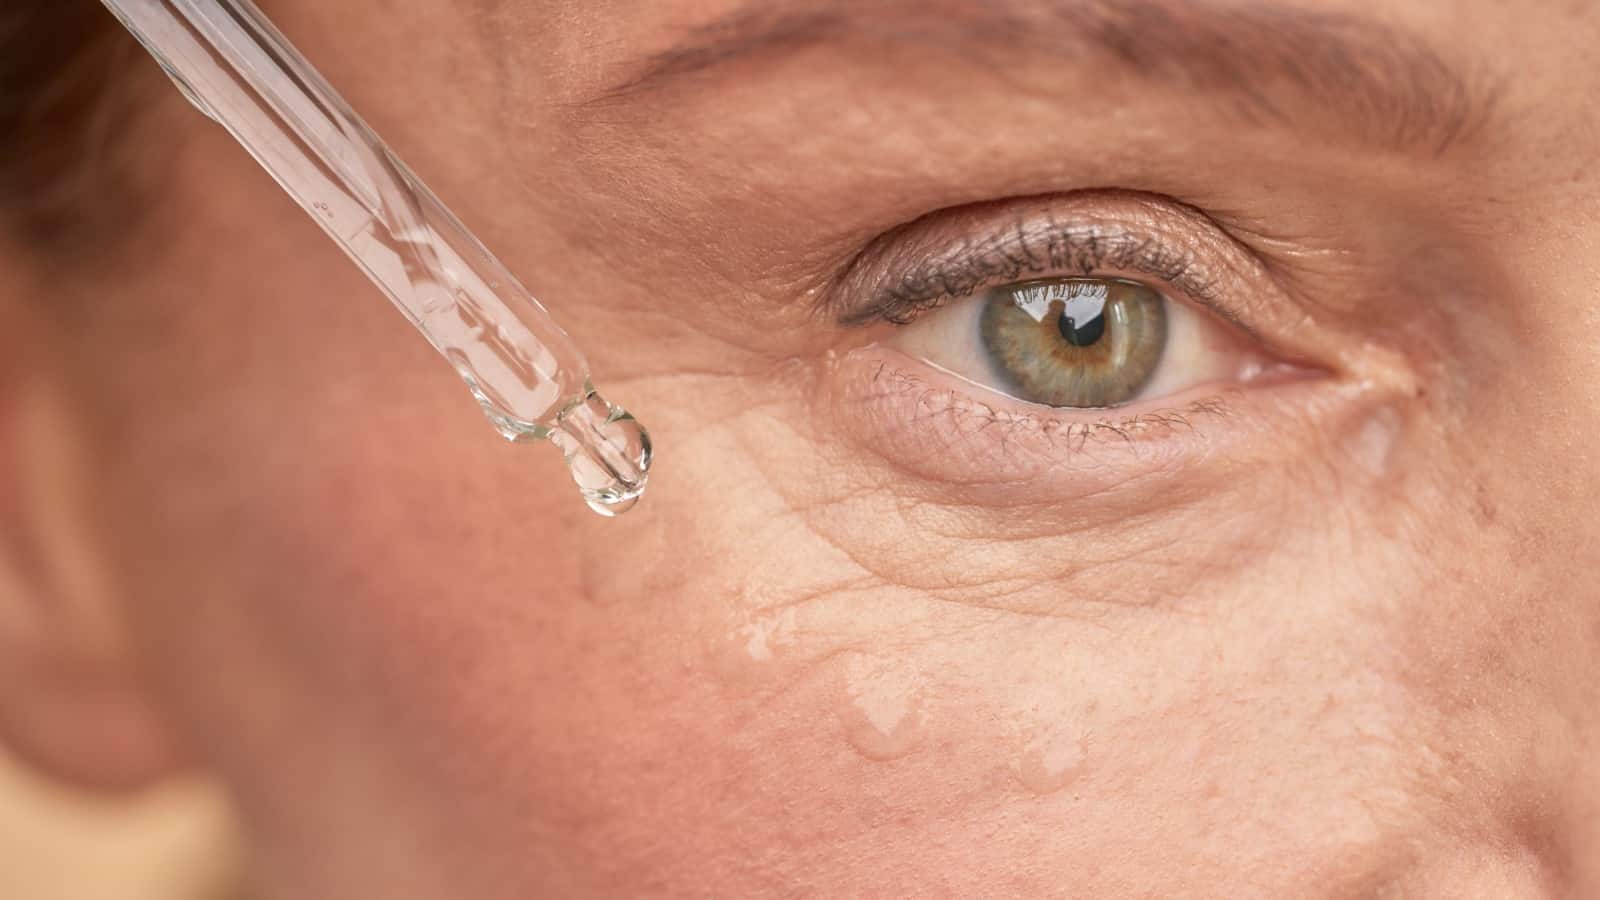 A cheaper, more ethical way to produce hyaluronic acid for aesthetic and other purposes. Photo Kostiantyn Voitenko via Shutterstock.com